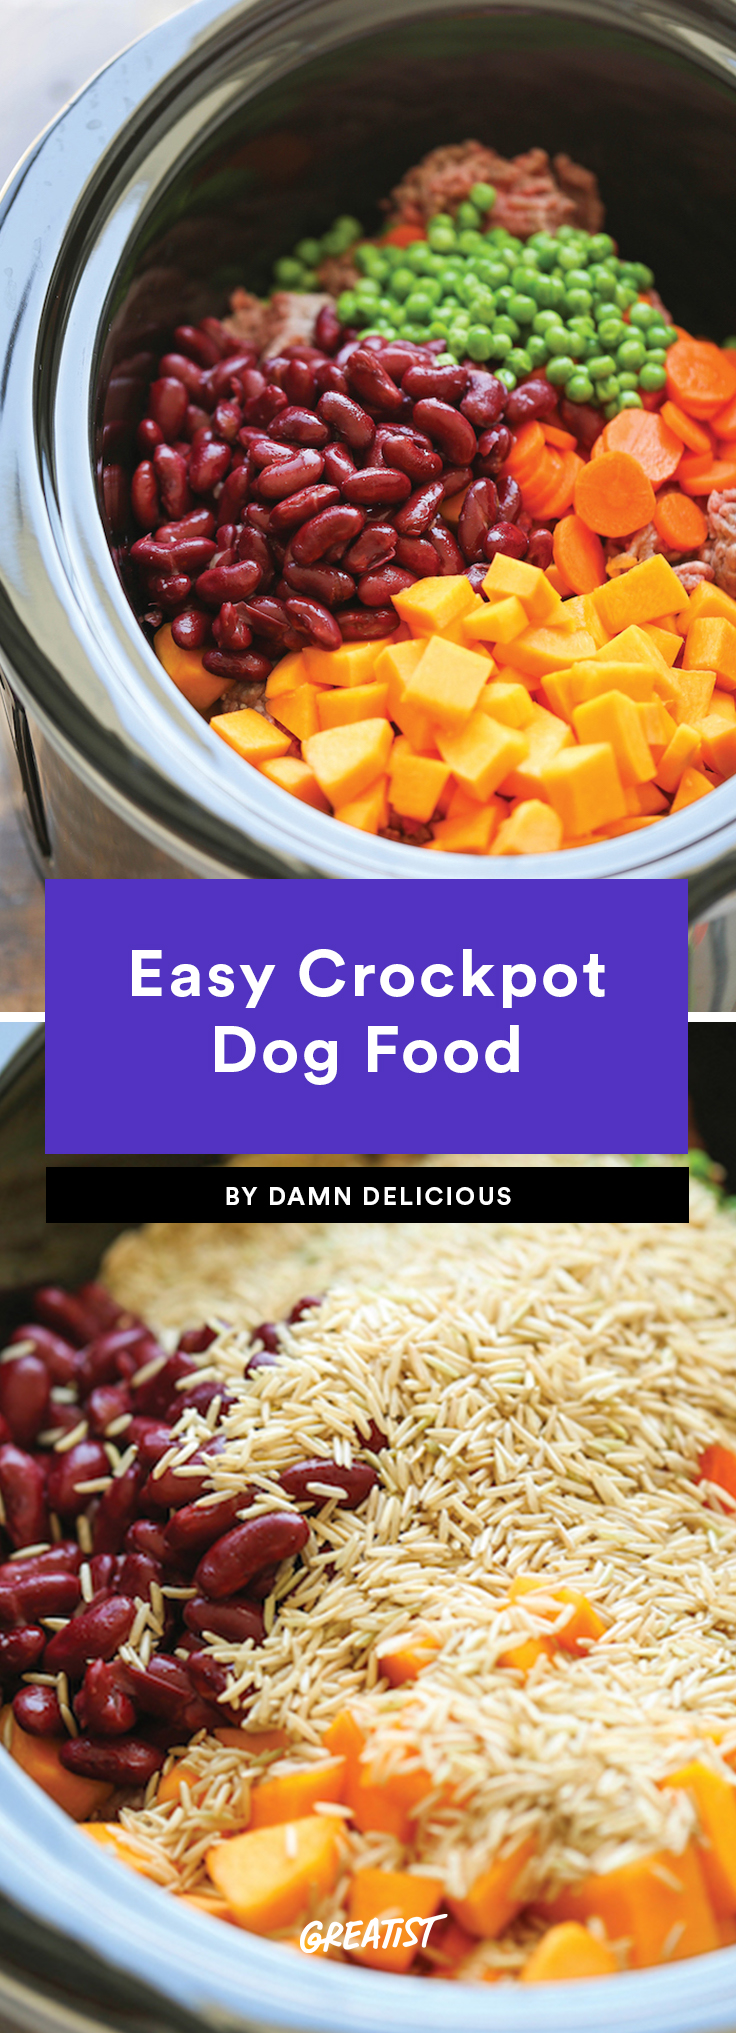 Healthy Food To Cook For Dogs | Healthy Food Recipes